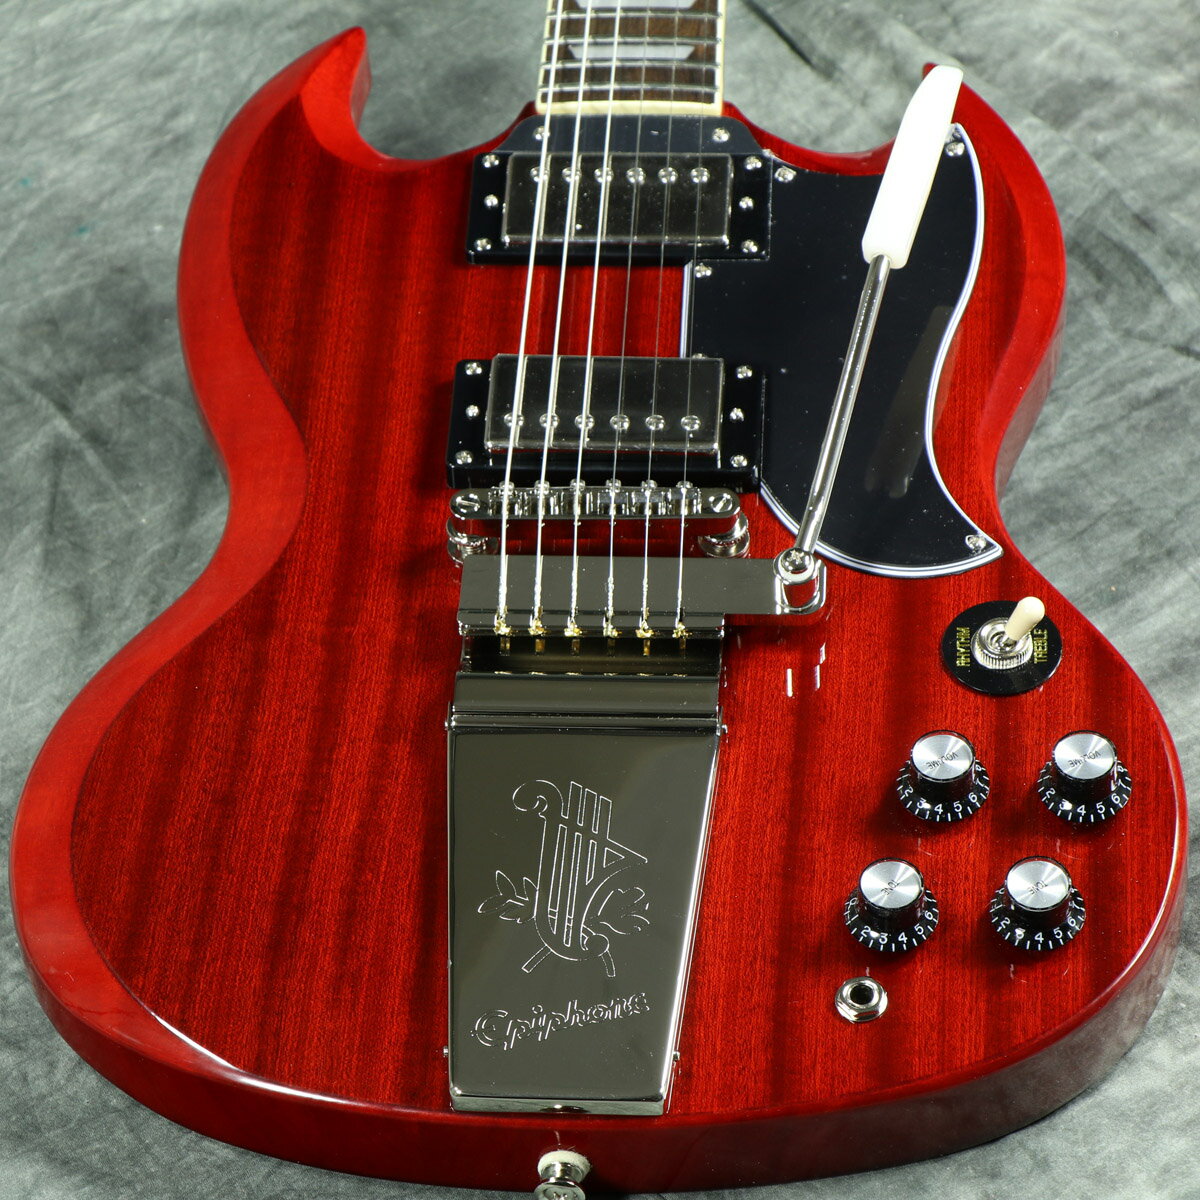 Epiphone by Gibson / Inspired by Gibson SG Standard 60s Maestro Vibrola Vintage Cherry エピフォン エレキギター【御茶ノ水本店】